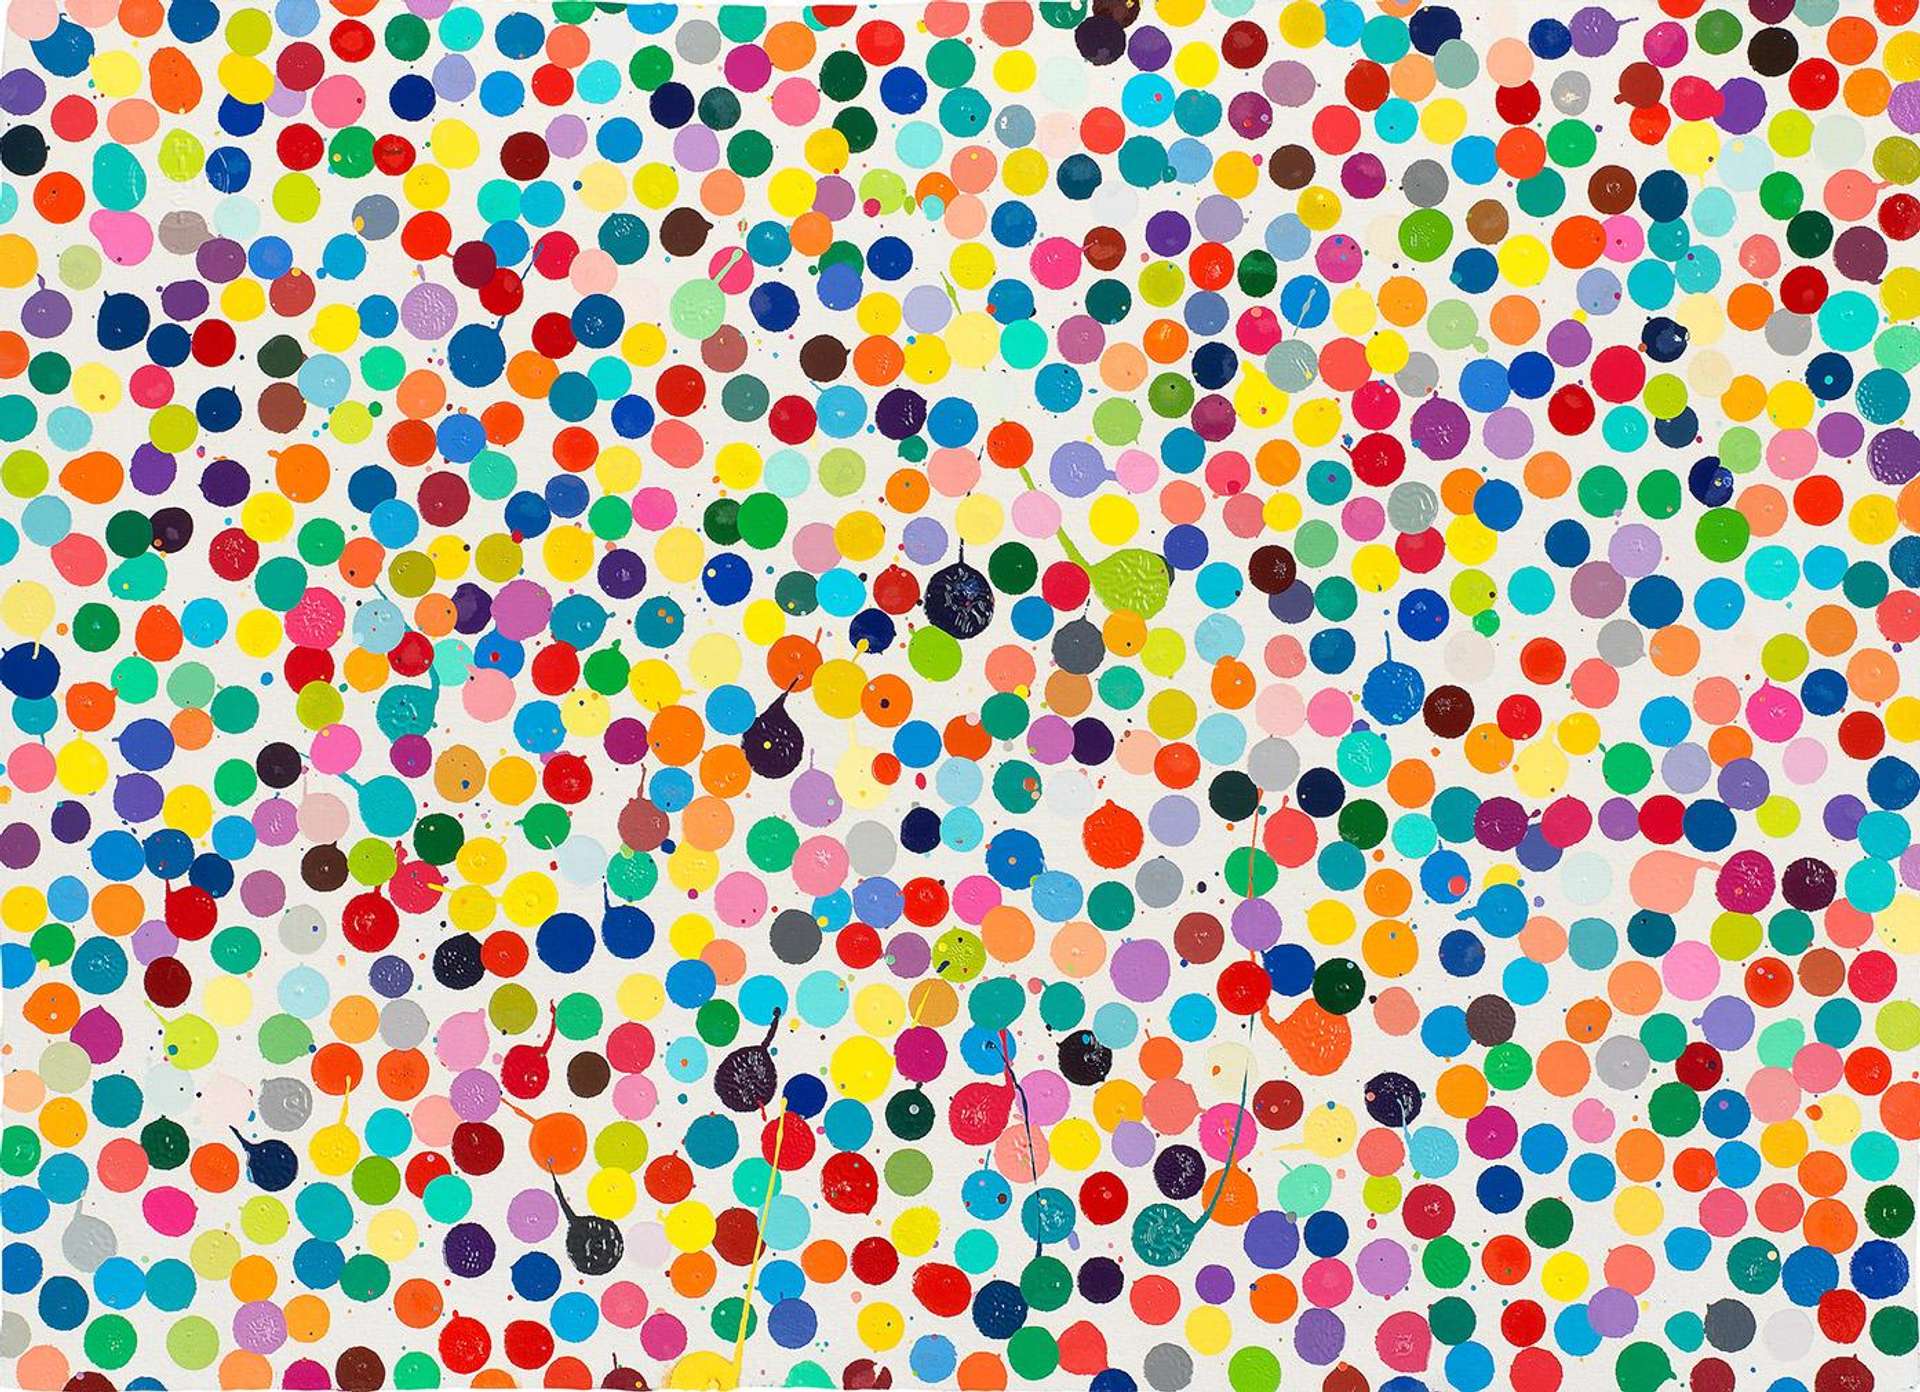 Small multi-coloured dots painted on a white background.